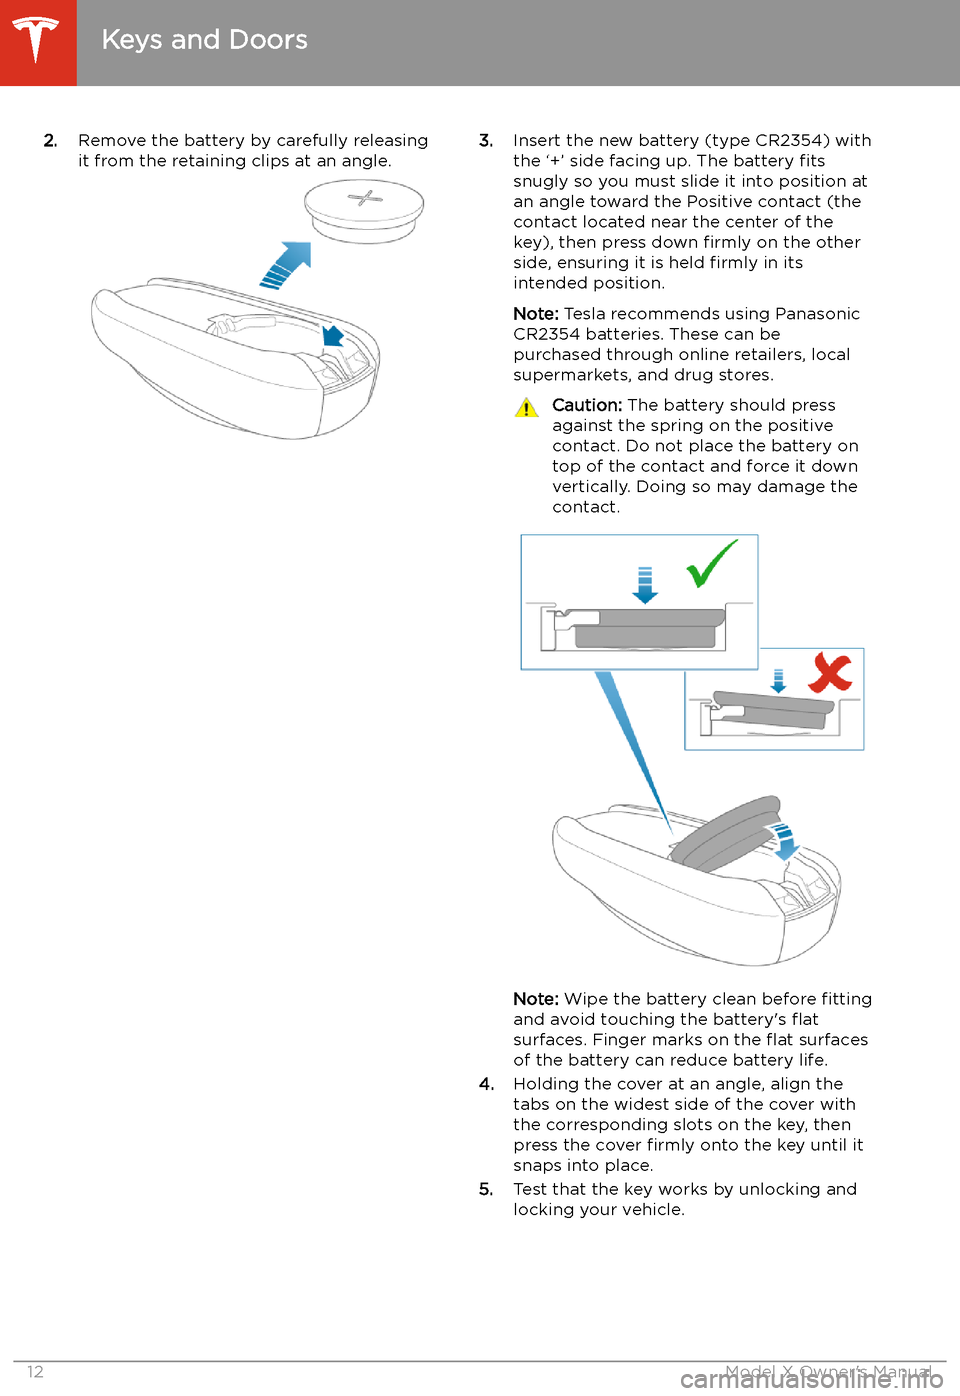 TESLA MODEL X 2020  Owners Manual 2.Remove the battery by carefully releasing
it from the retaining clips at an angle.3. Insert the new battery (type CR2354) with
the 